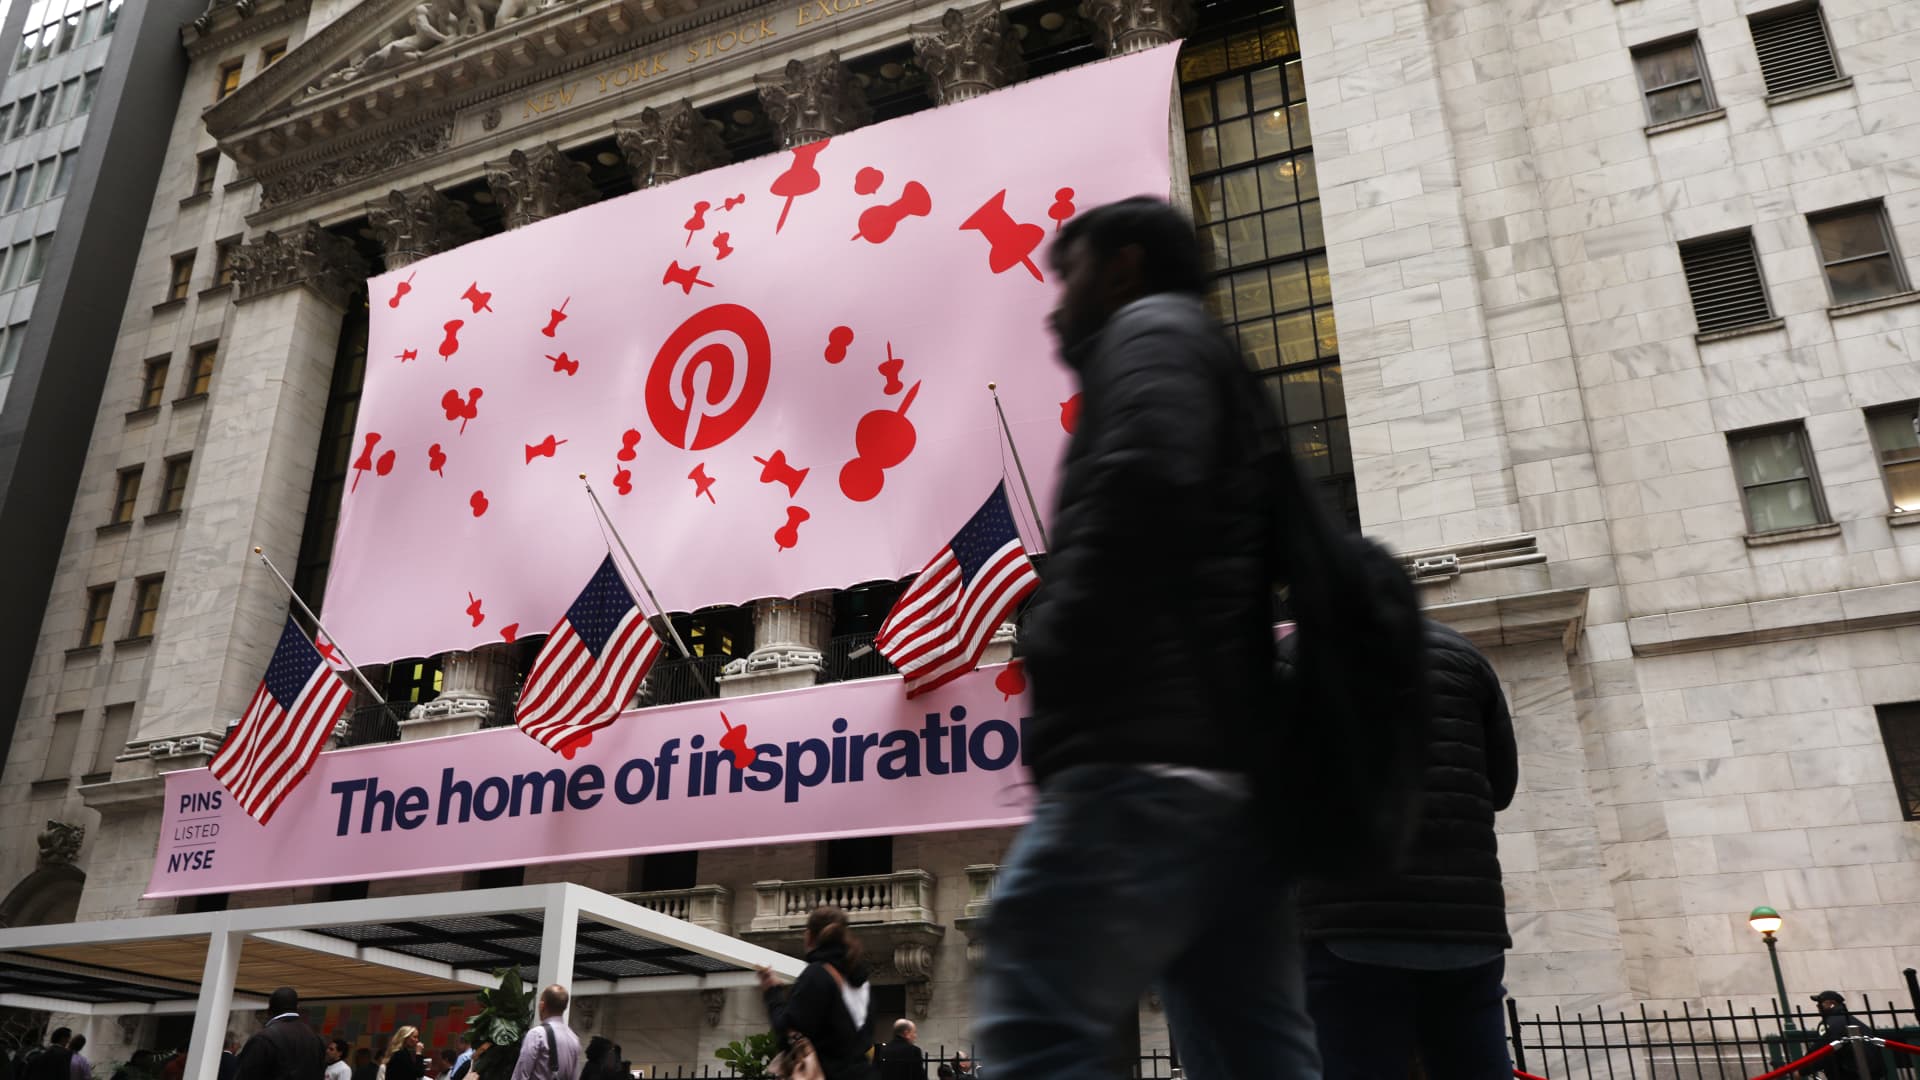 Pinterest jumps 11% on better-than-expected third-quarter results